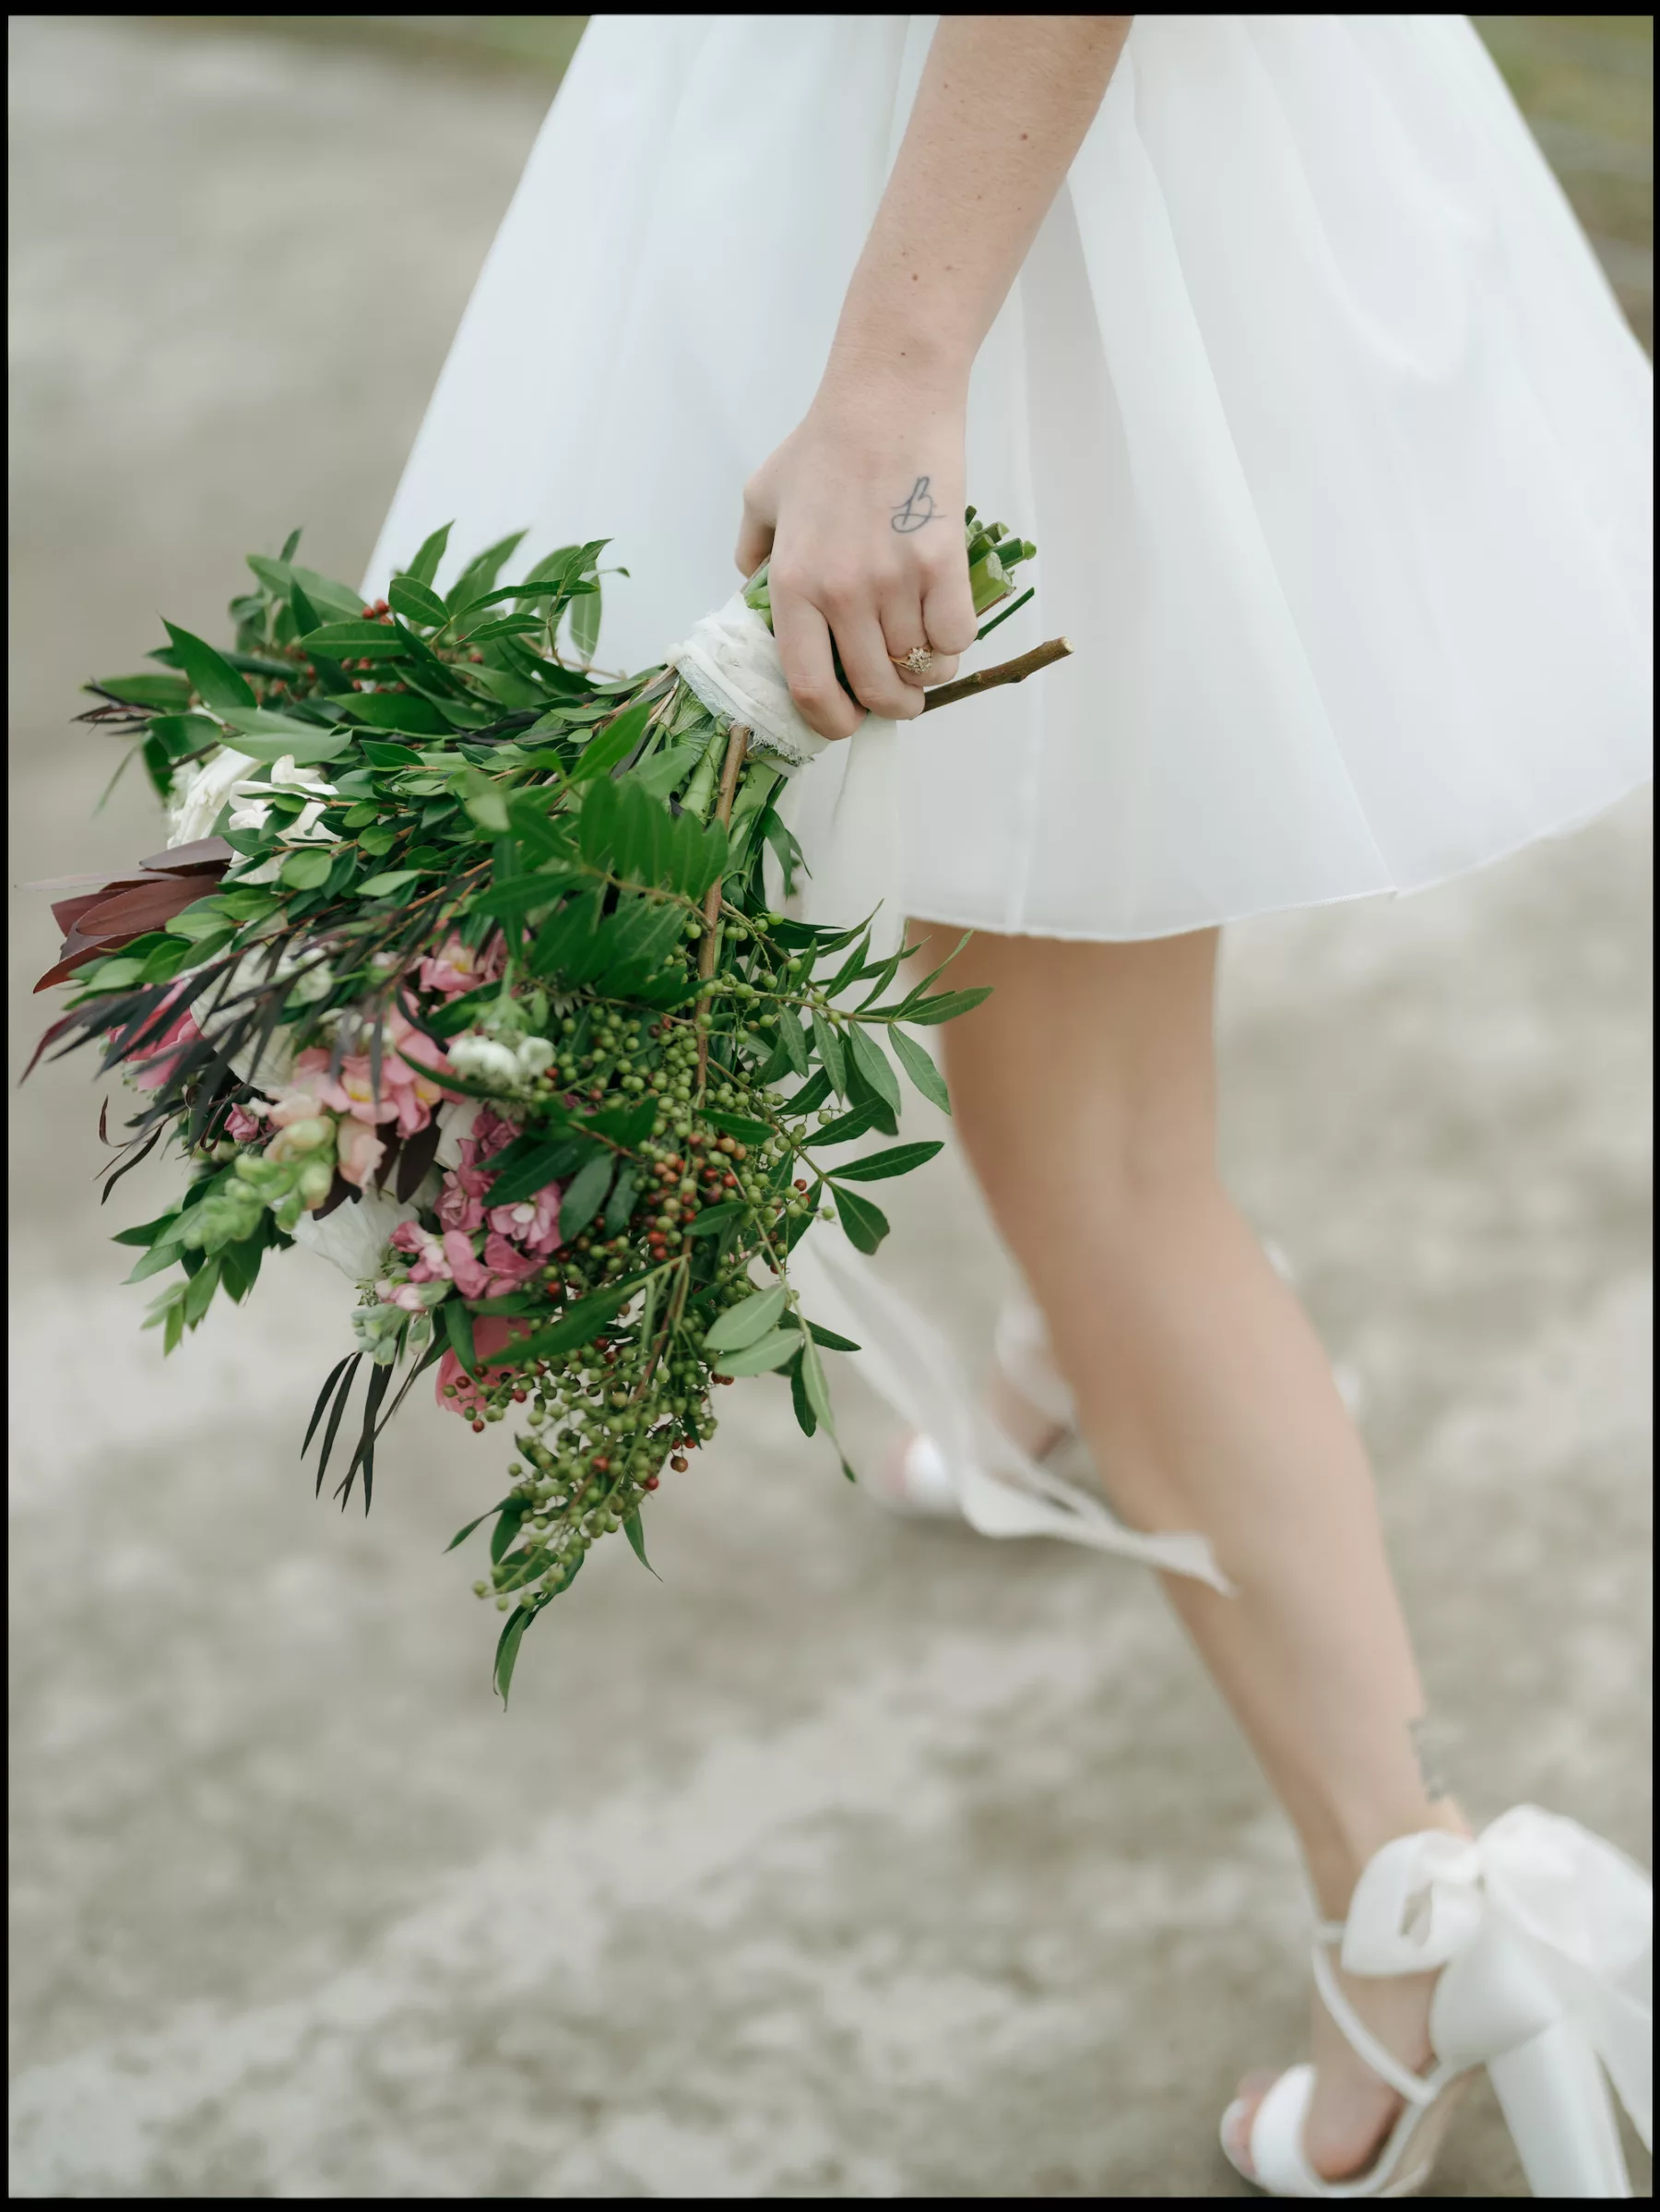 White Roses, Pink Tulips, Chrysanthemum, and Greenery Bouquet Inspiration | Tampa Bay Florist Save The Date Florida